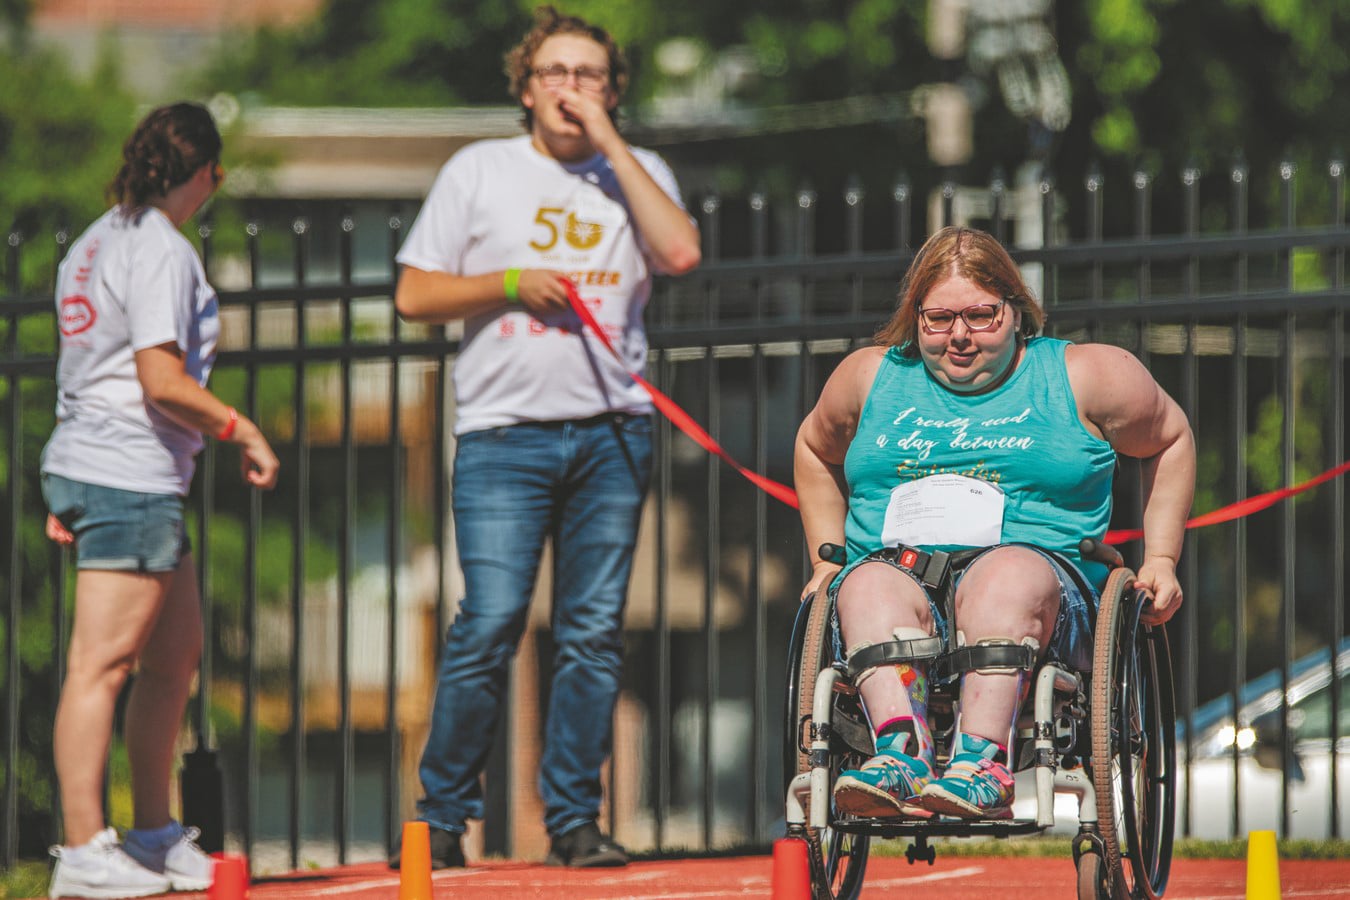 An athlete who uses a wheelchair races down the track while a volunteer looks on from behind